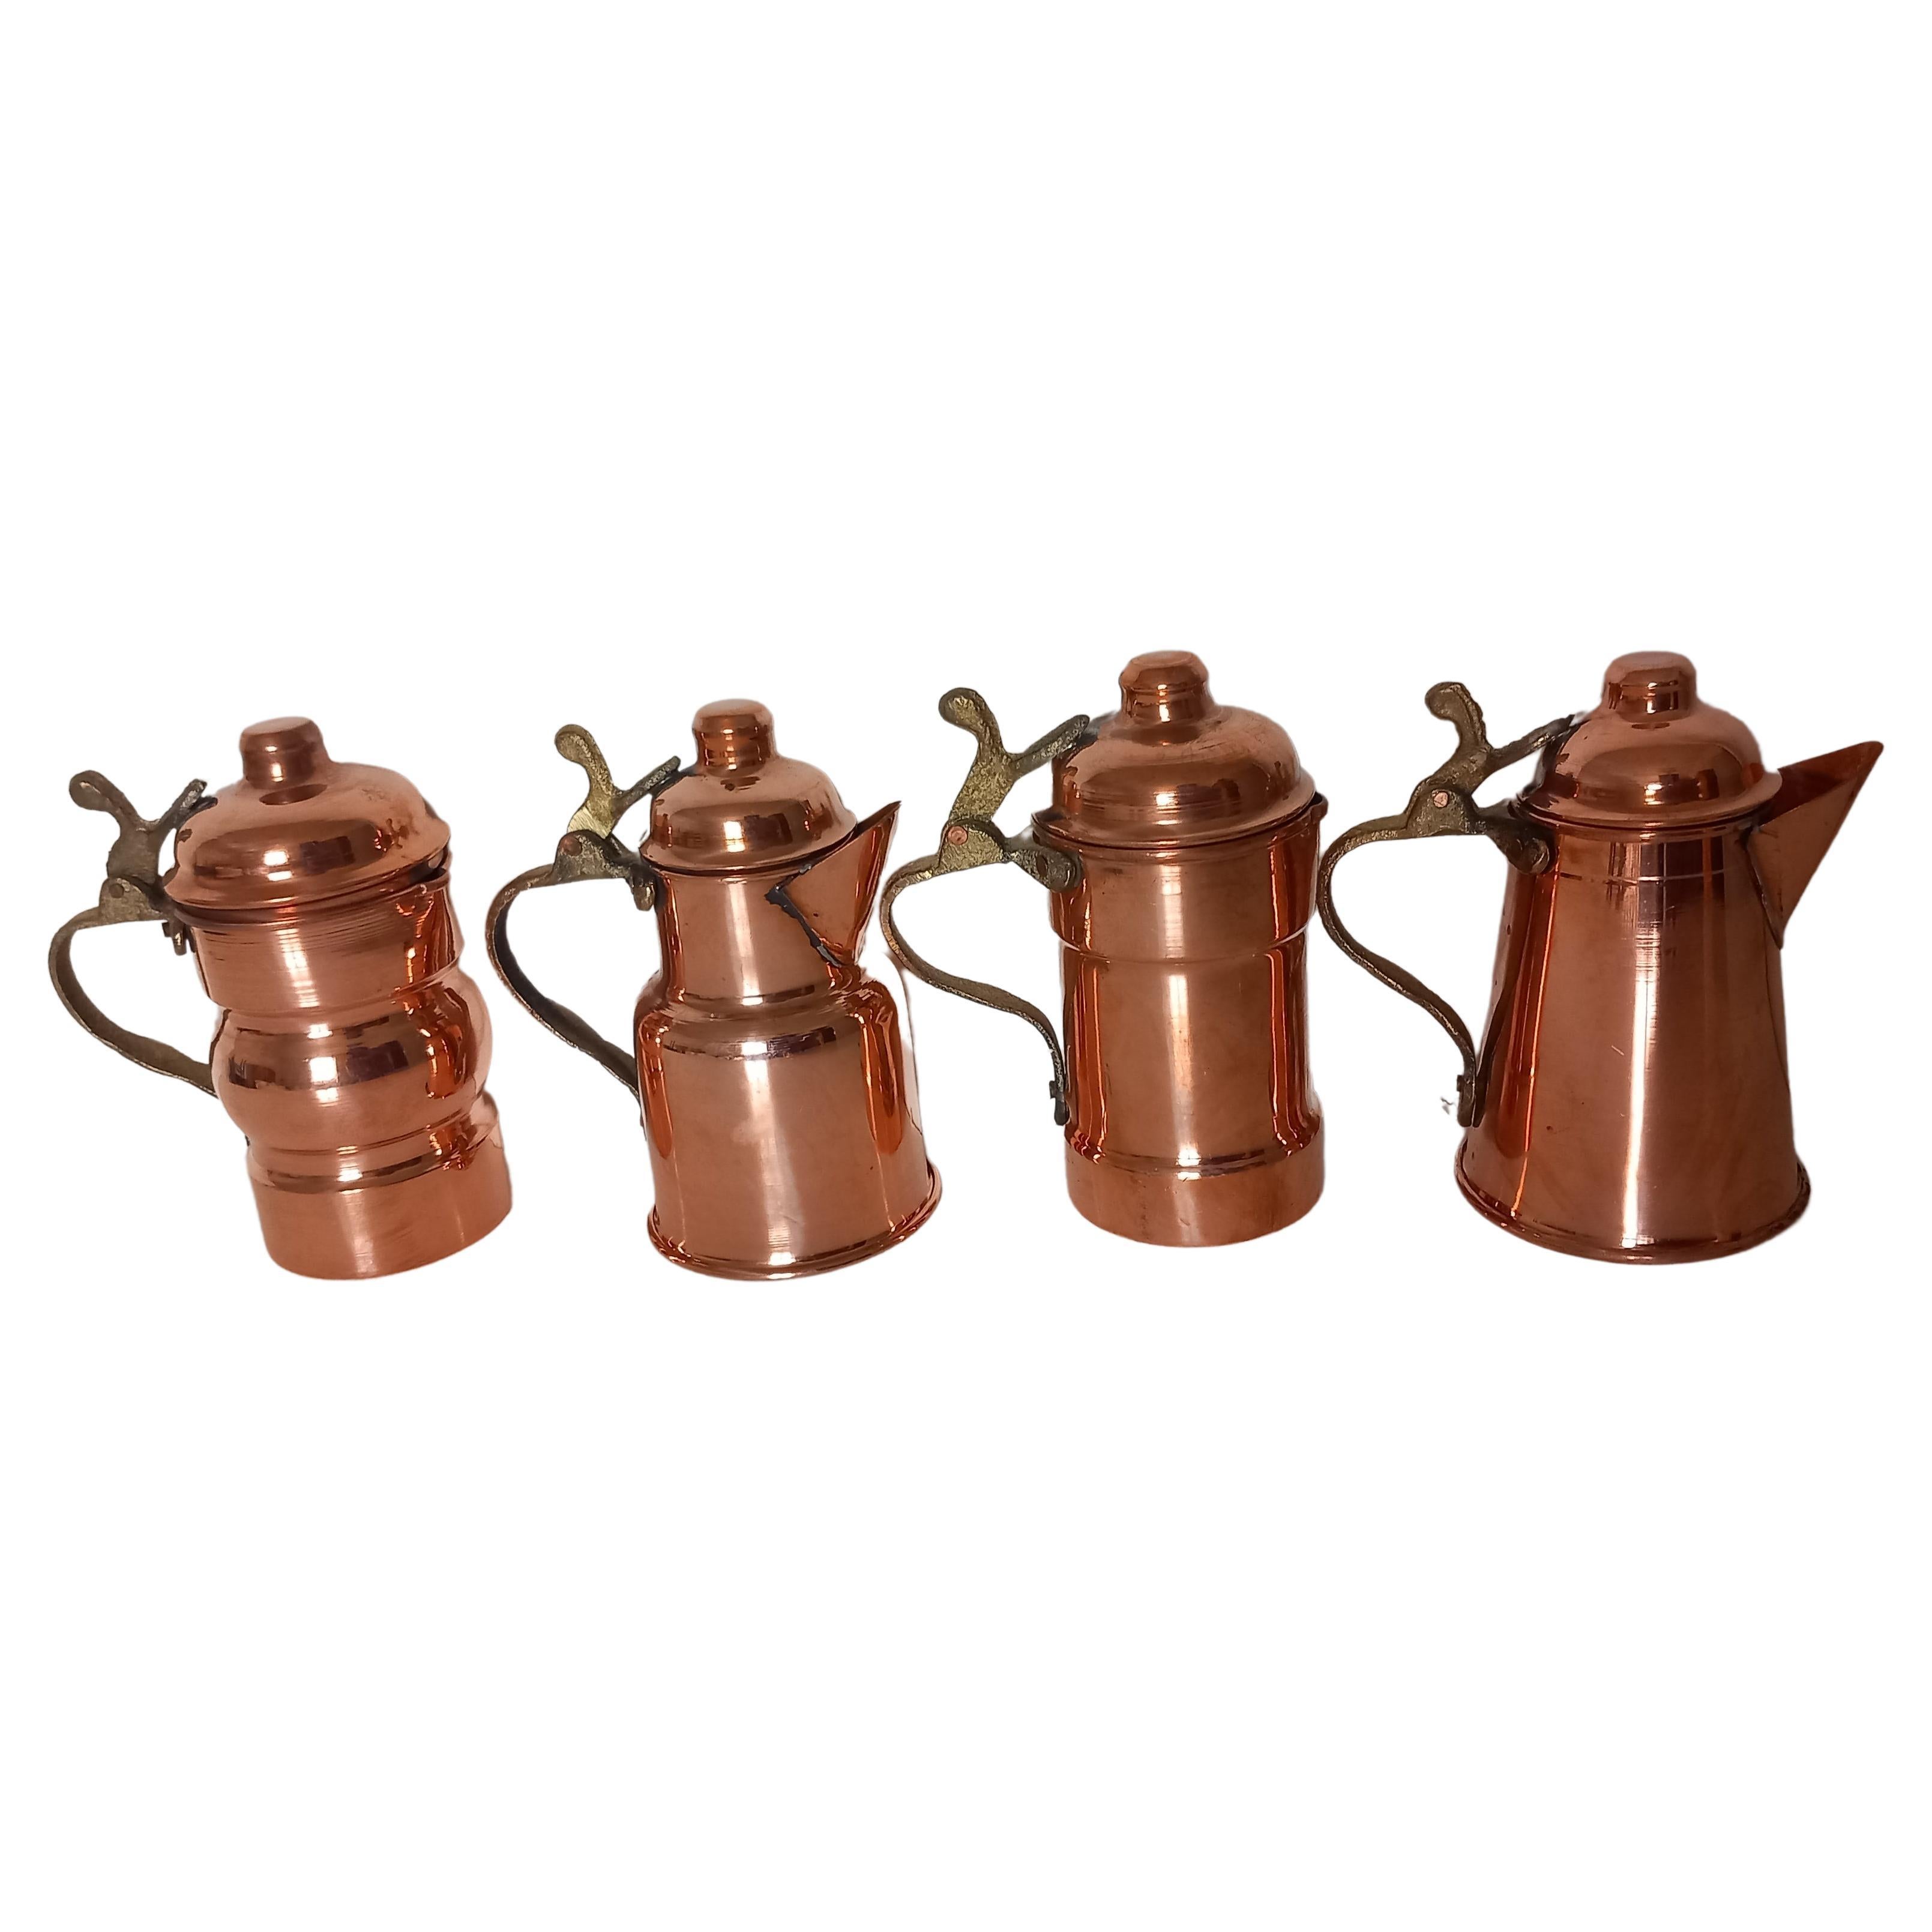 Lot of four vintage copper coffee pots for rustic kitchen decoration
vintage rustic style copper kitchen decoration
They are very decorative pieces. They come from Tuscany, Italy and will give your kitchen a very special touch.